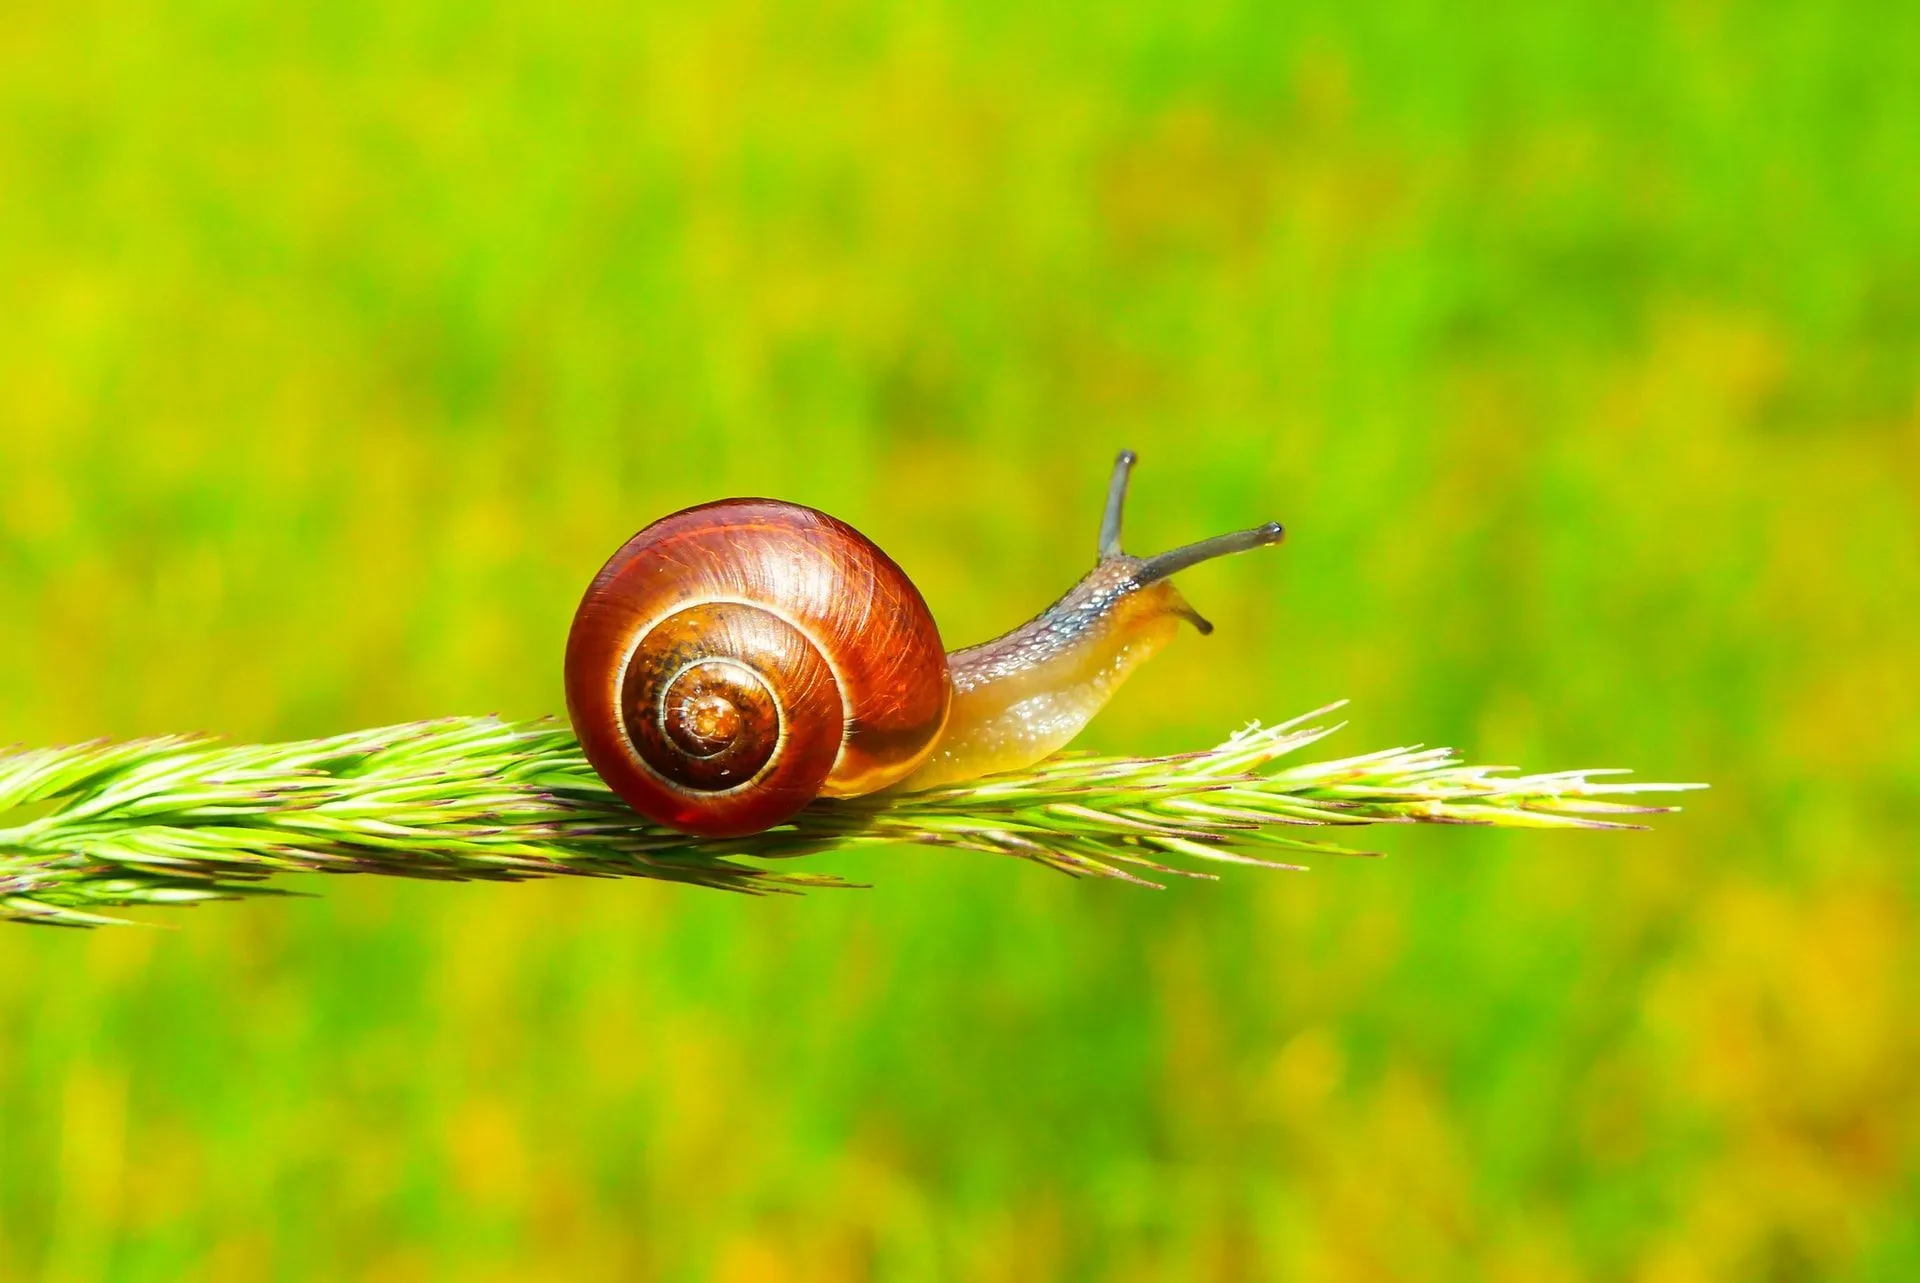 How Long Way Can A Snail Cross In A Day?